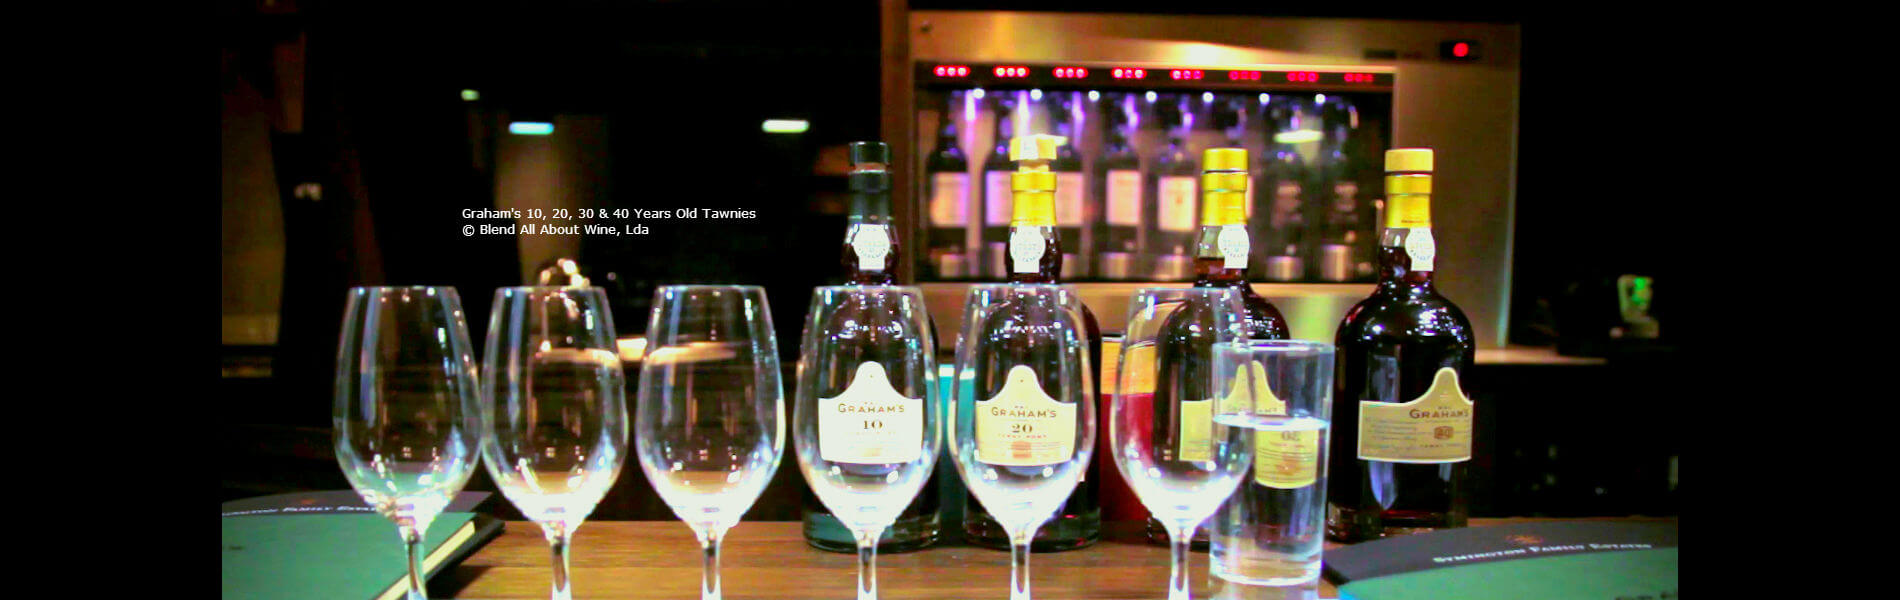 Blend-All-About-Wine-Grahm's-Tasting-Dated-Tawnies-The-Wines-Slider